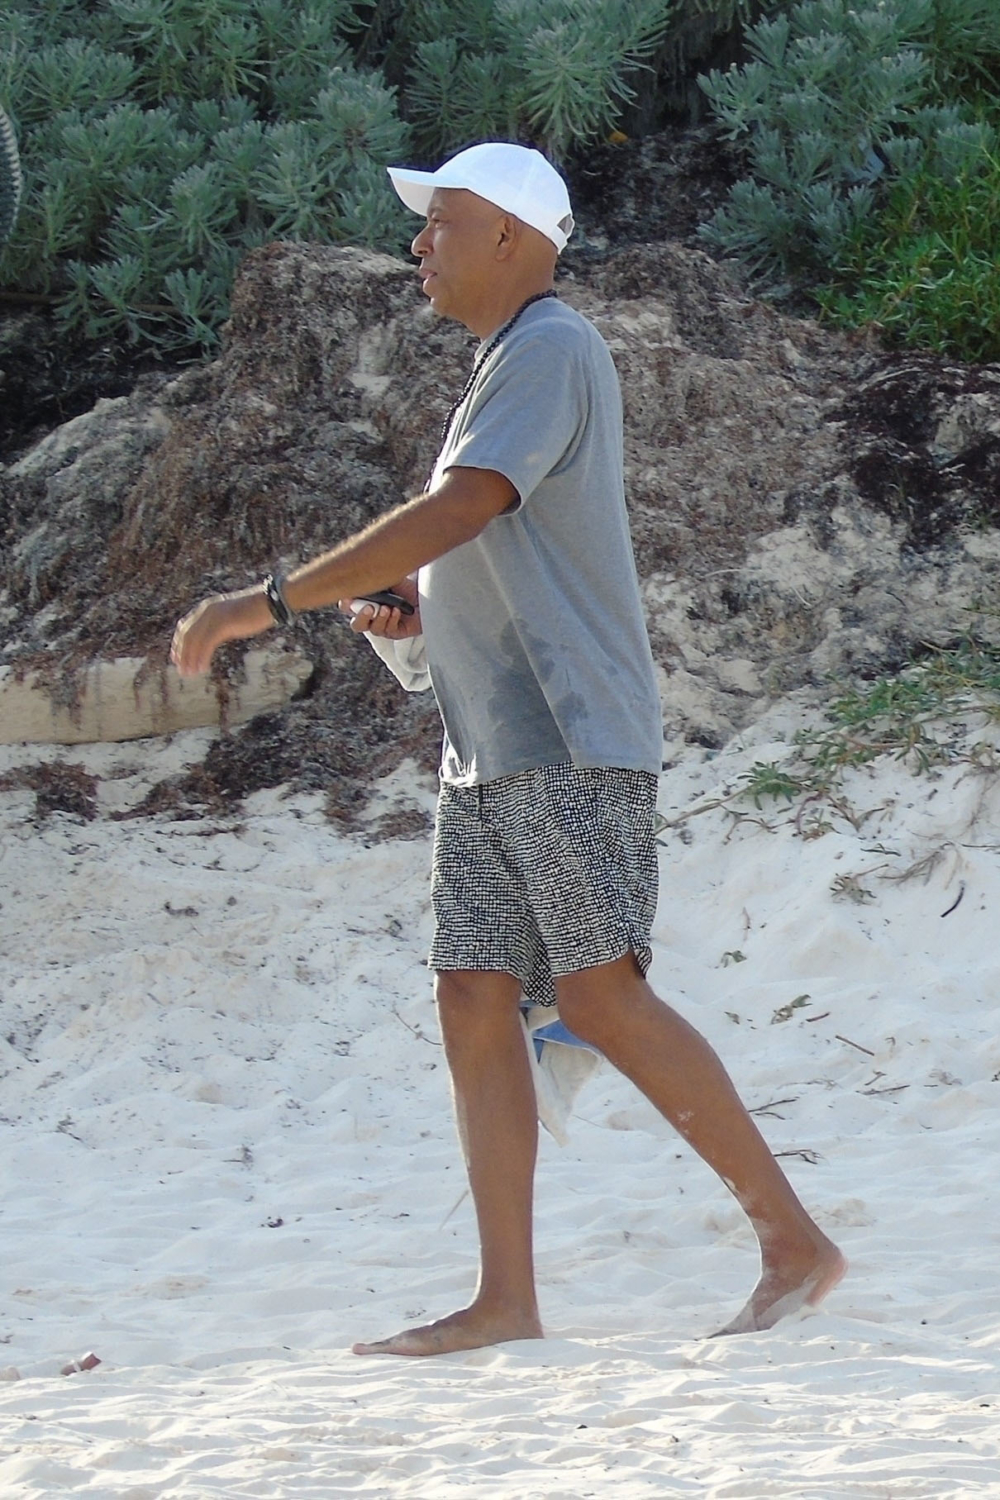 Russell Simmons is spotted enjoying the beach with his family on New Year's Day